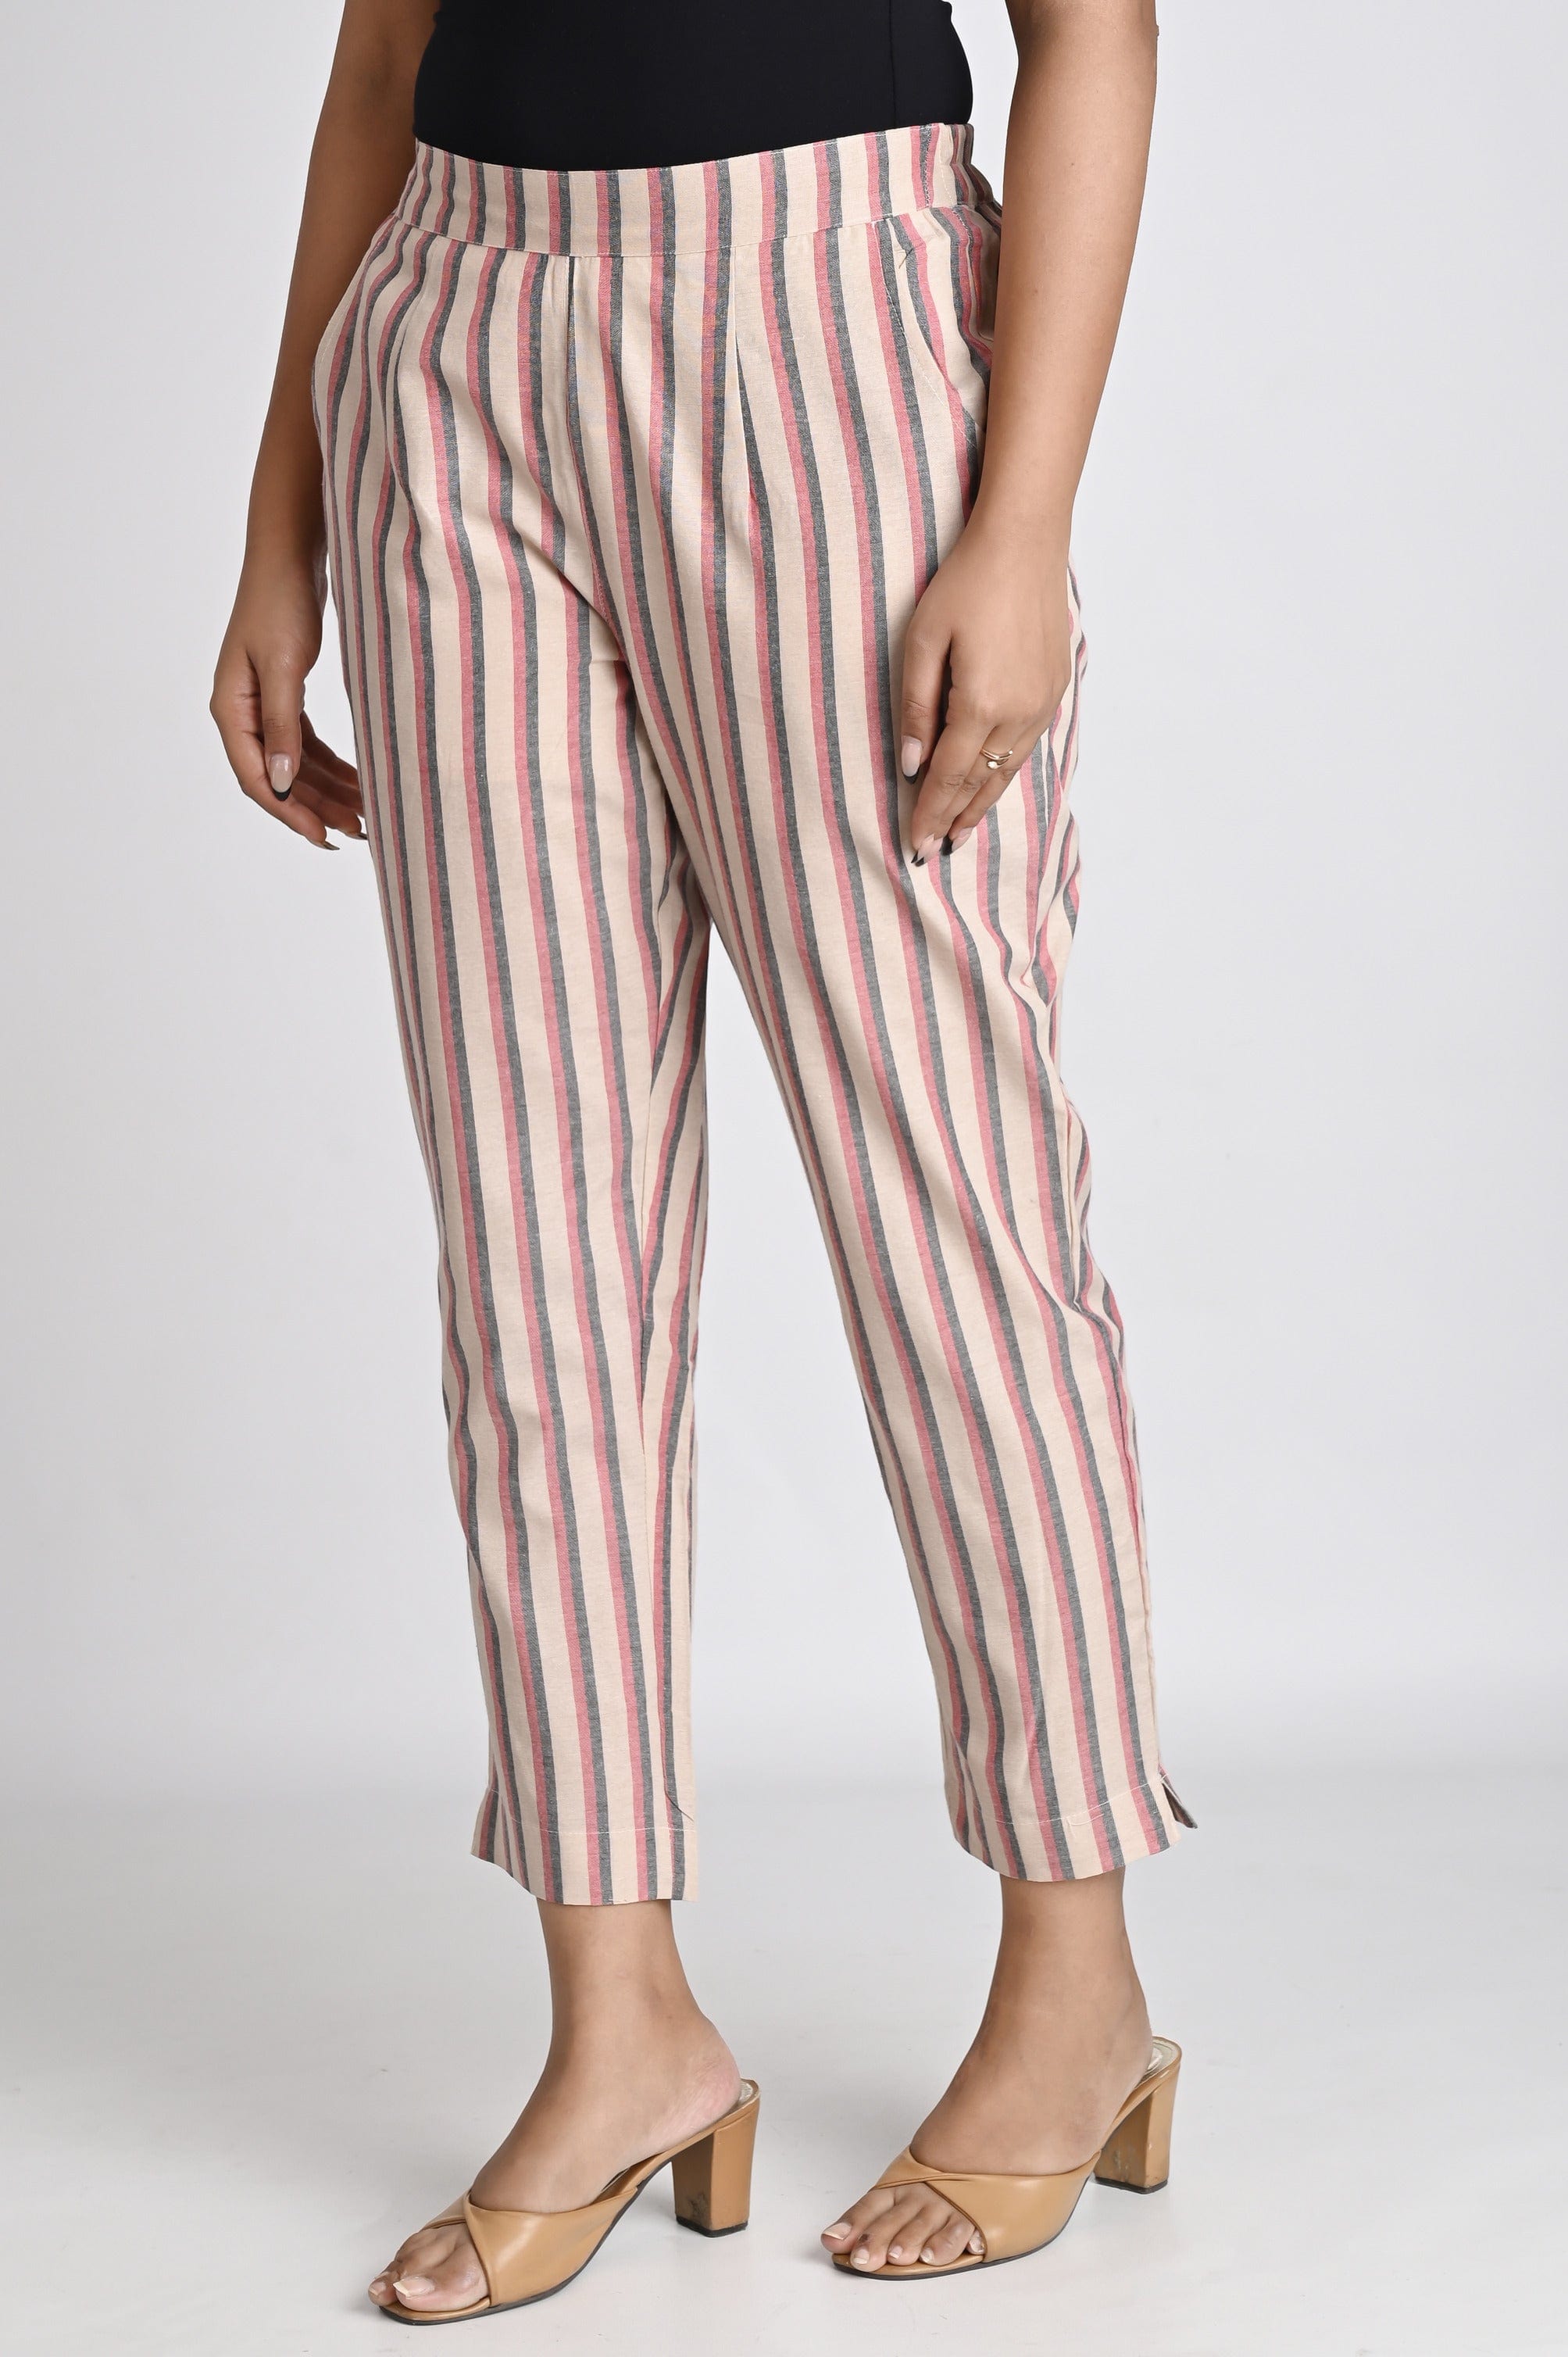 Brown & Maroon Striped Cotton Pants